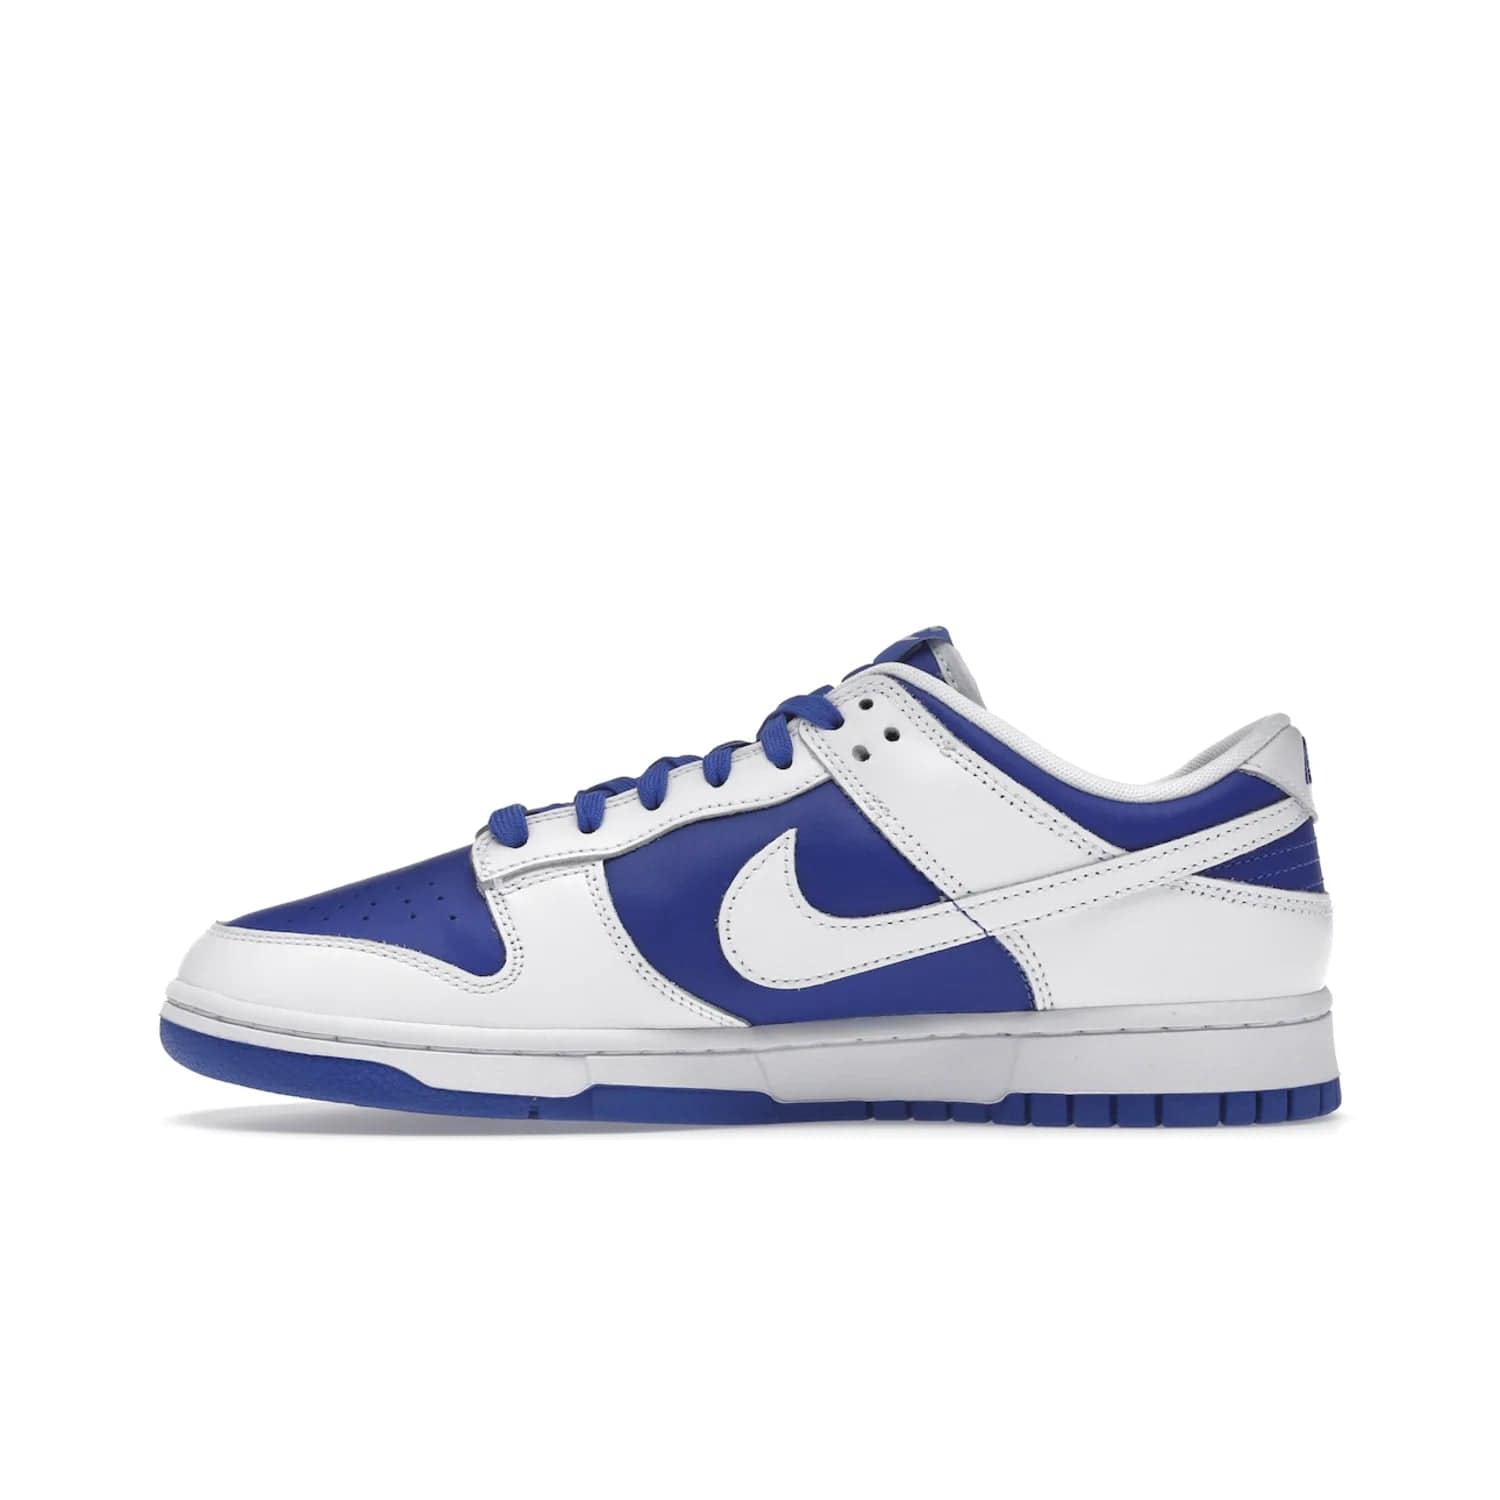 Nike Dunk Low Racer Blue White - Image 19 - Only at www.BallersClubKickz.com - Sleek Racer Blue leather upper and white leather overlays make up the Nike Dunk Low Racer Blue White. Woven tag and heel embroidery for a 1985 Dunk look with a matching EVA foam sole completes the classic colorway.